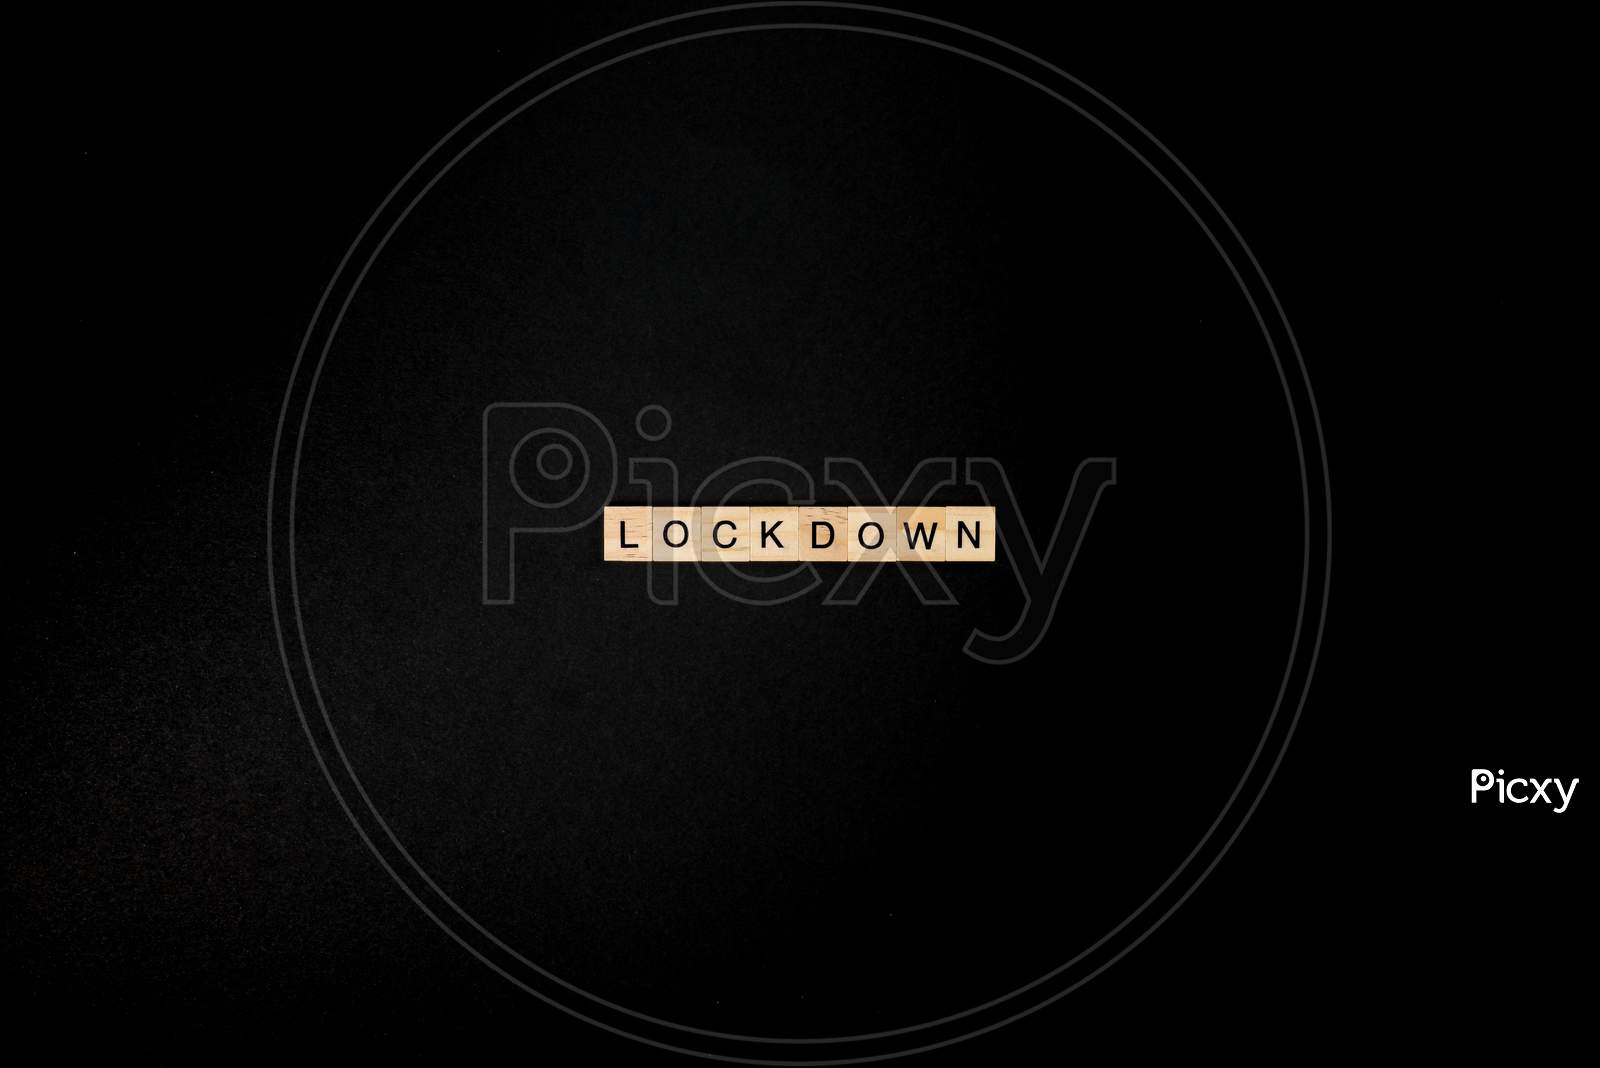 Wooden Letters On A Black Background Forming The Word “Lockdown”. Second Wave During Coronavirus Pandemic Concept.